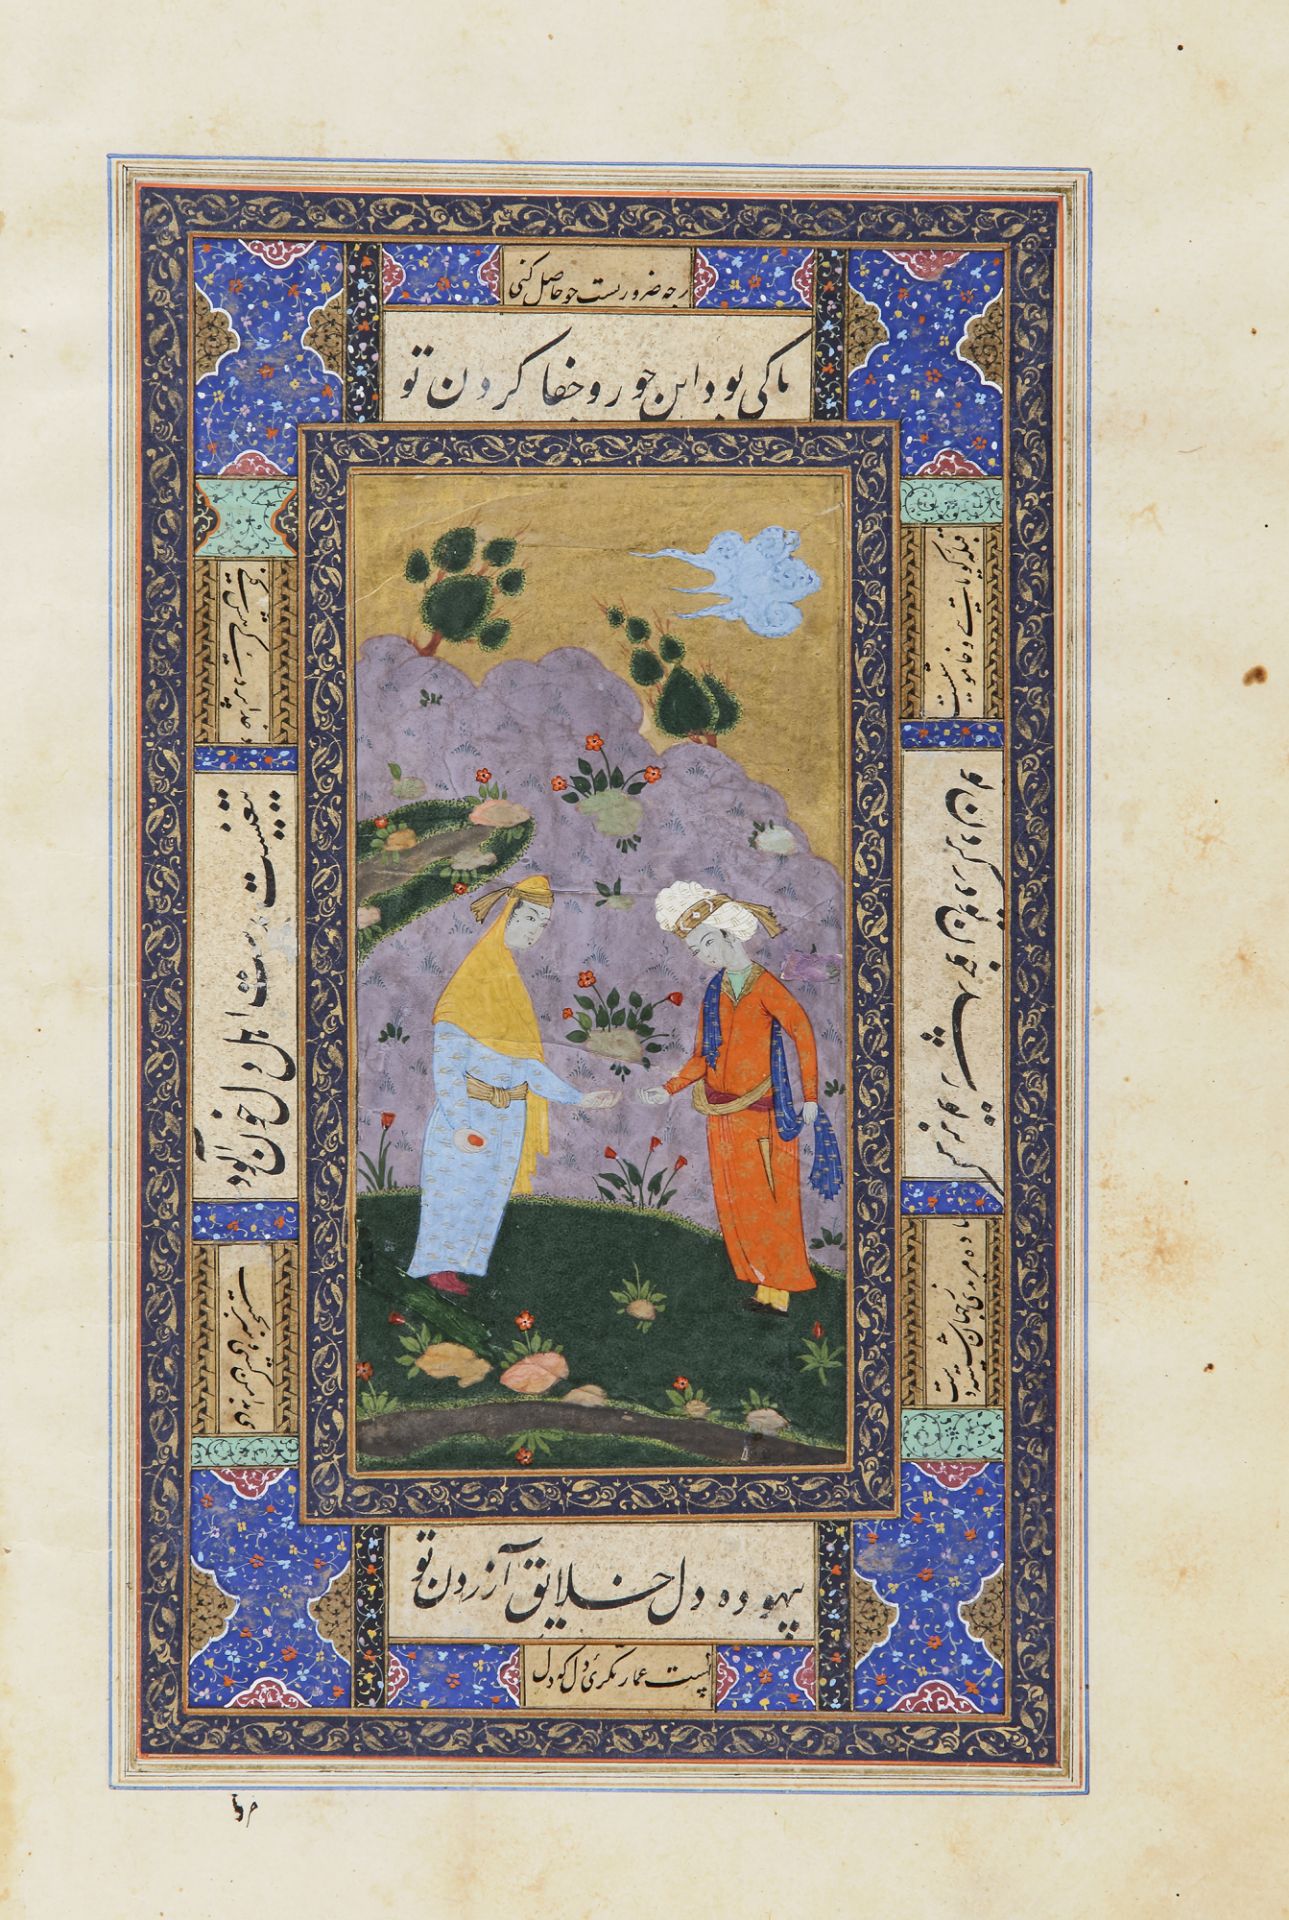 A PERSIAN DOUBLE-SIDED MINIATURE, ISFAHAN SCHOOL, 18TH CENTURY - Image 2 of 4